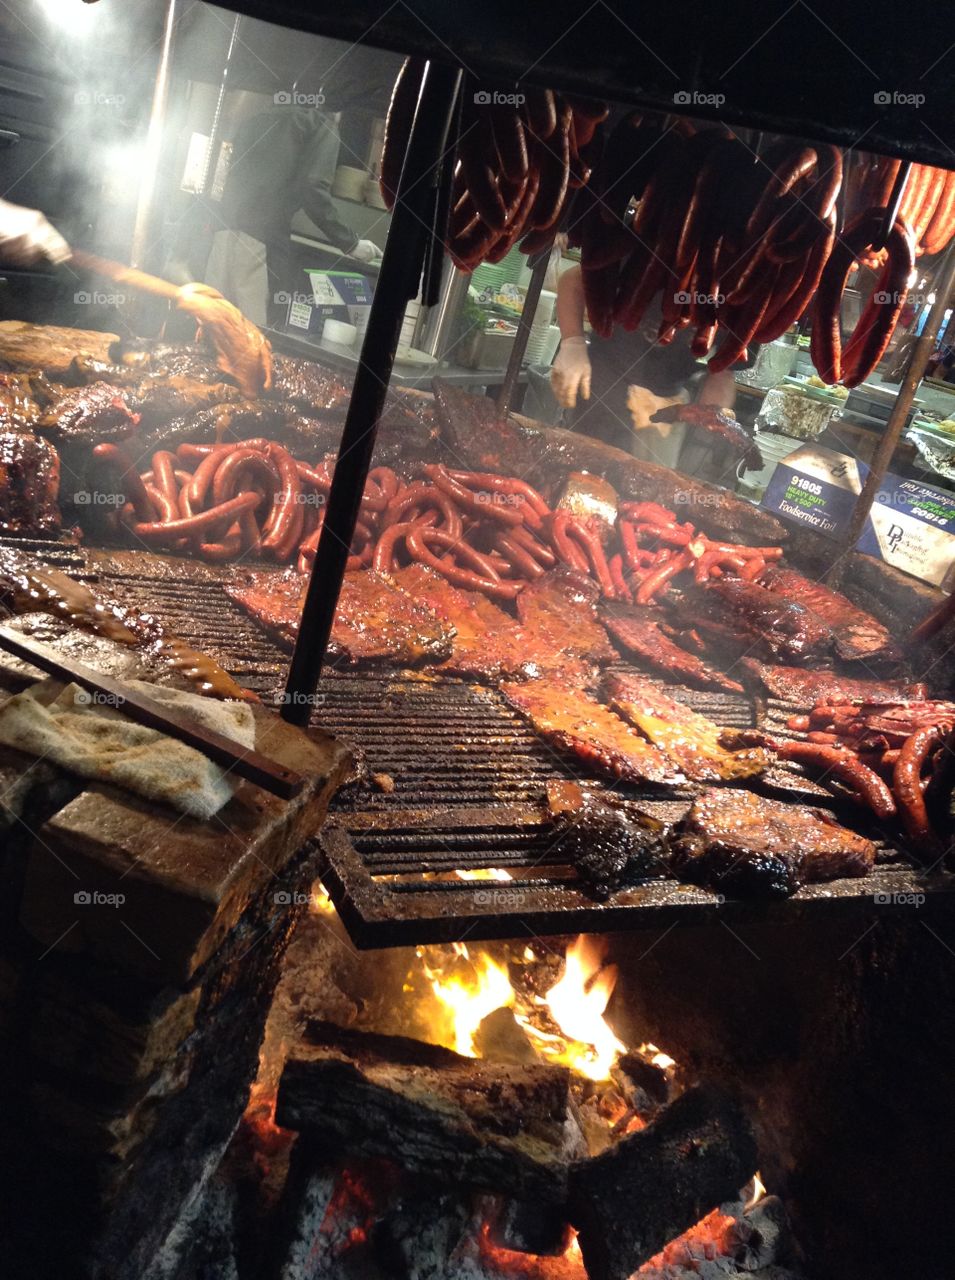 Salt Lick. Photo of the BBQ pit at The Salt Lick in Dripping Springs, TX